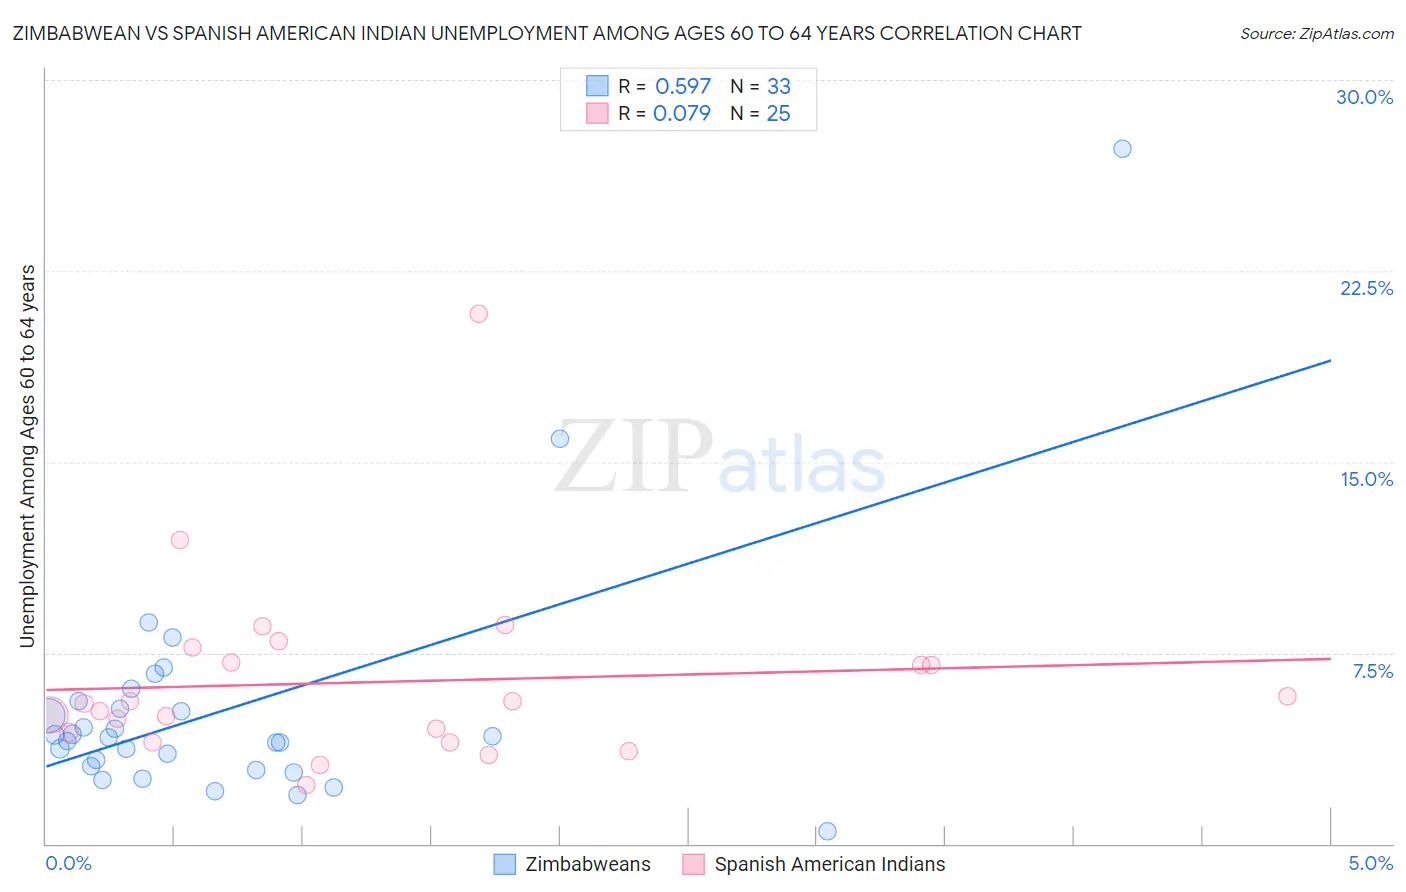 Zimbabwean vs Spanish American Indian Unemployment Among Ages 60 to 64 years